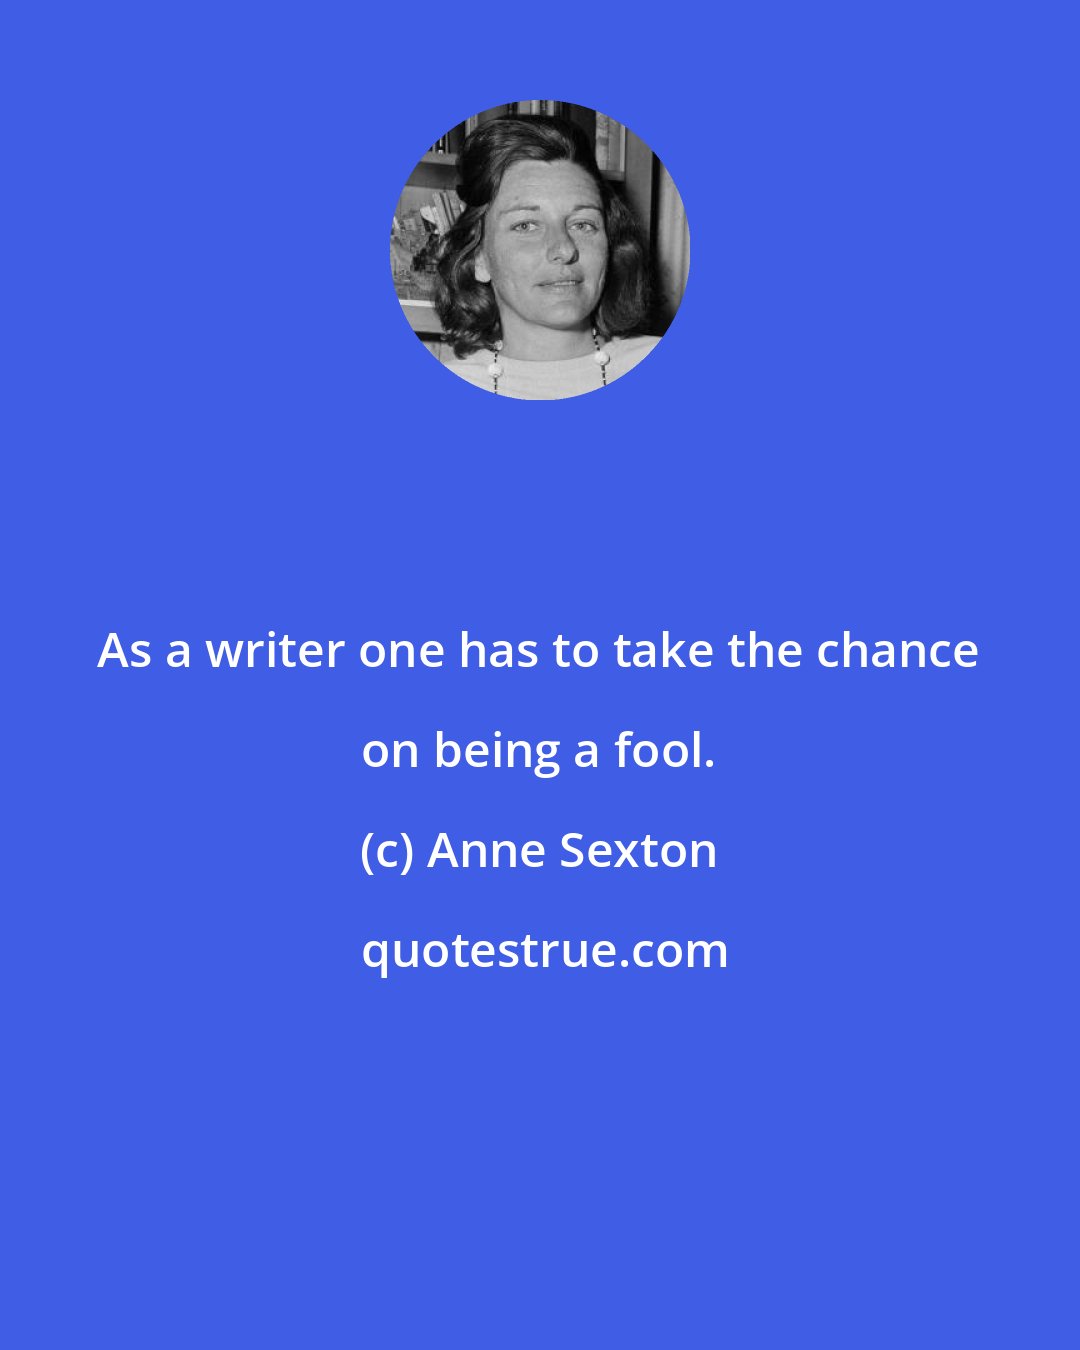 Anne Sexton: As a writer one has to take the chance on being a fool.